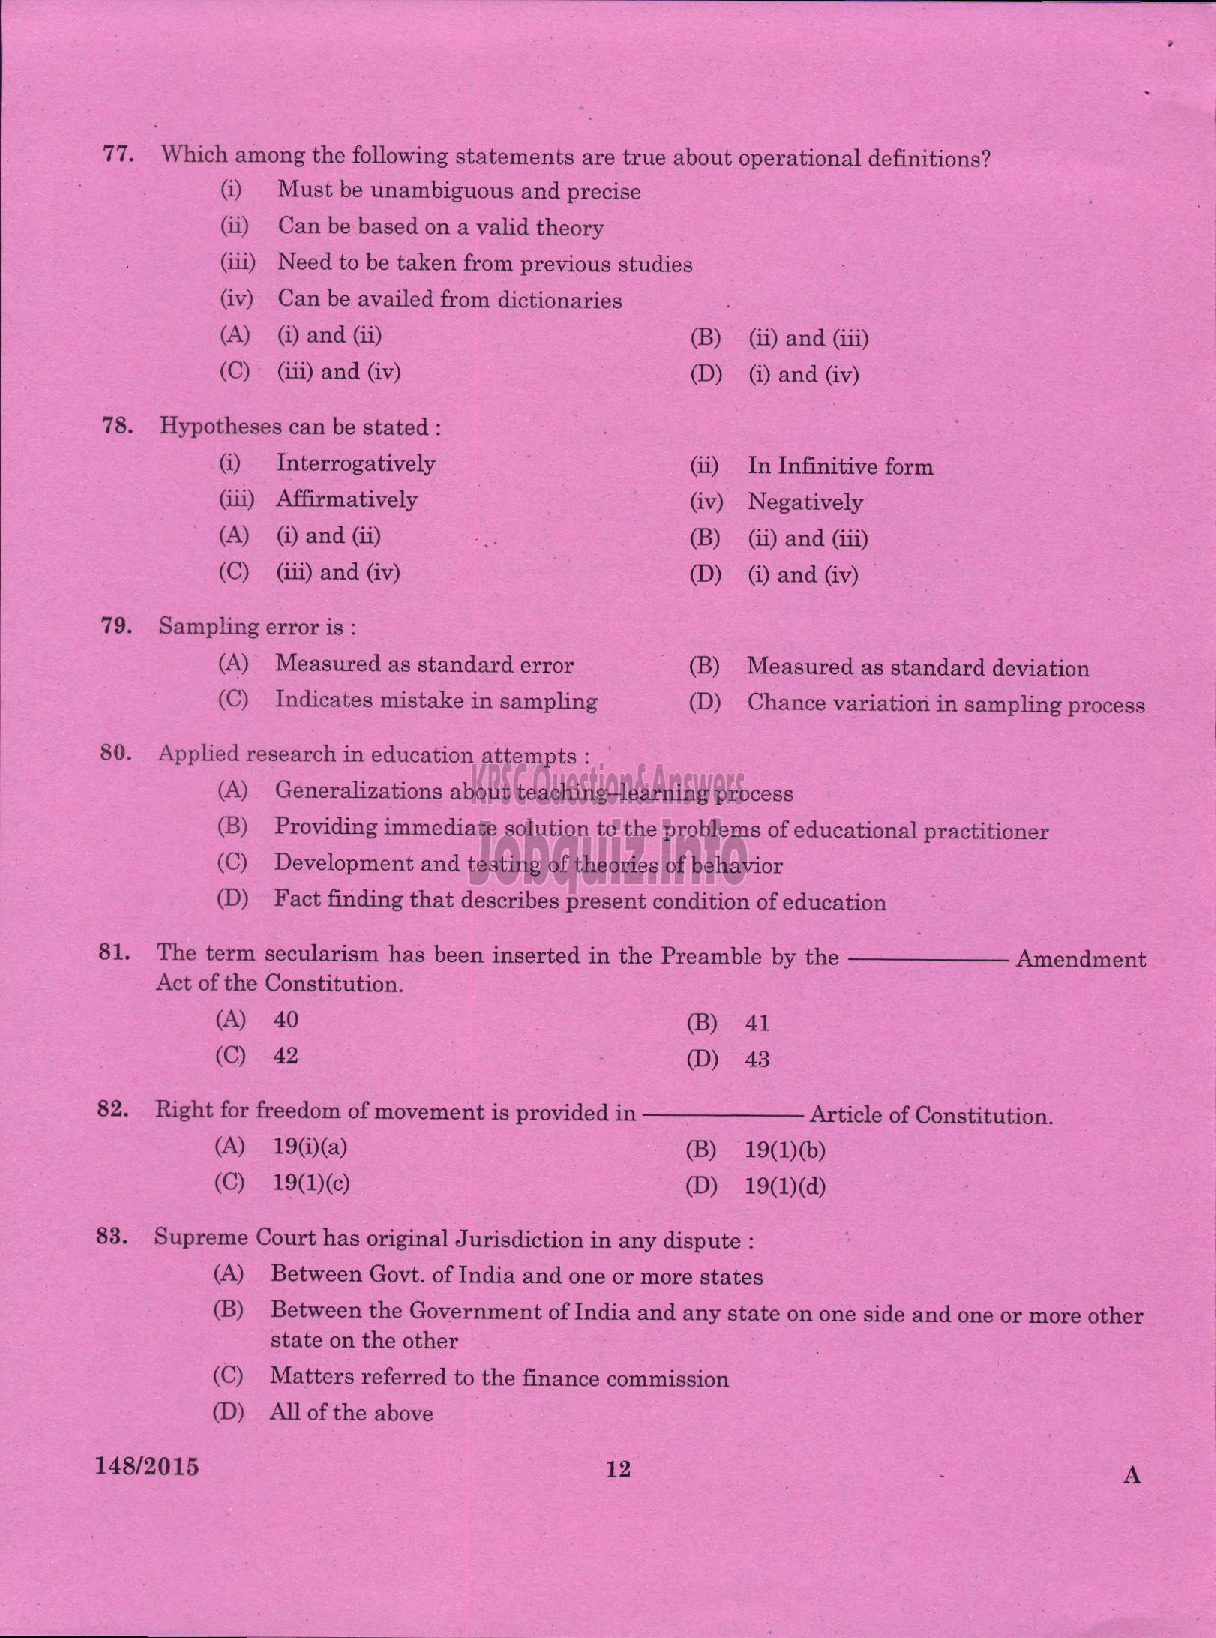 Kerala PSC Question Paper - LECTURER IN HOMESCIENCE FOOD AND NUTRITION COLLEGIATE EDUCATION-10